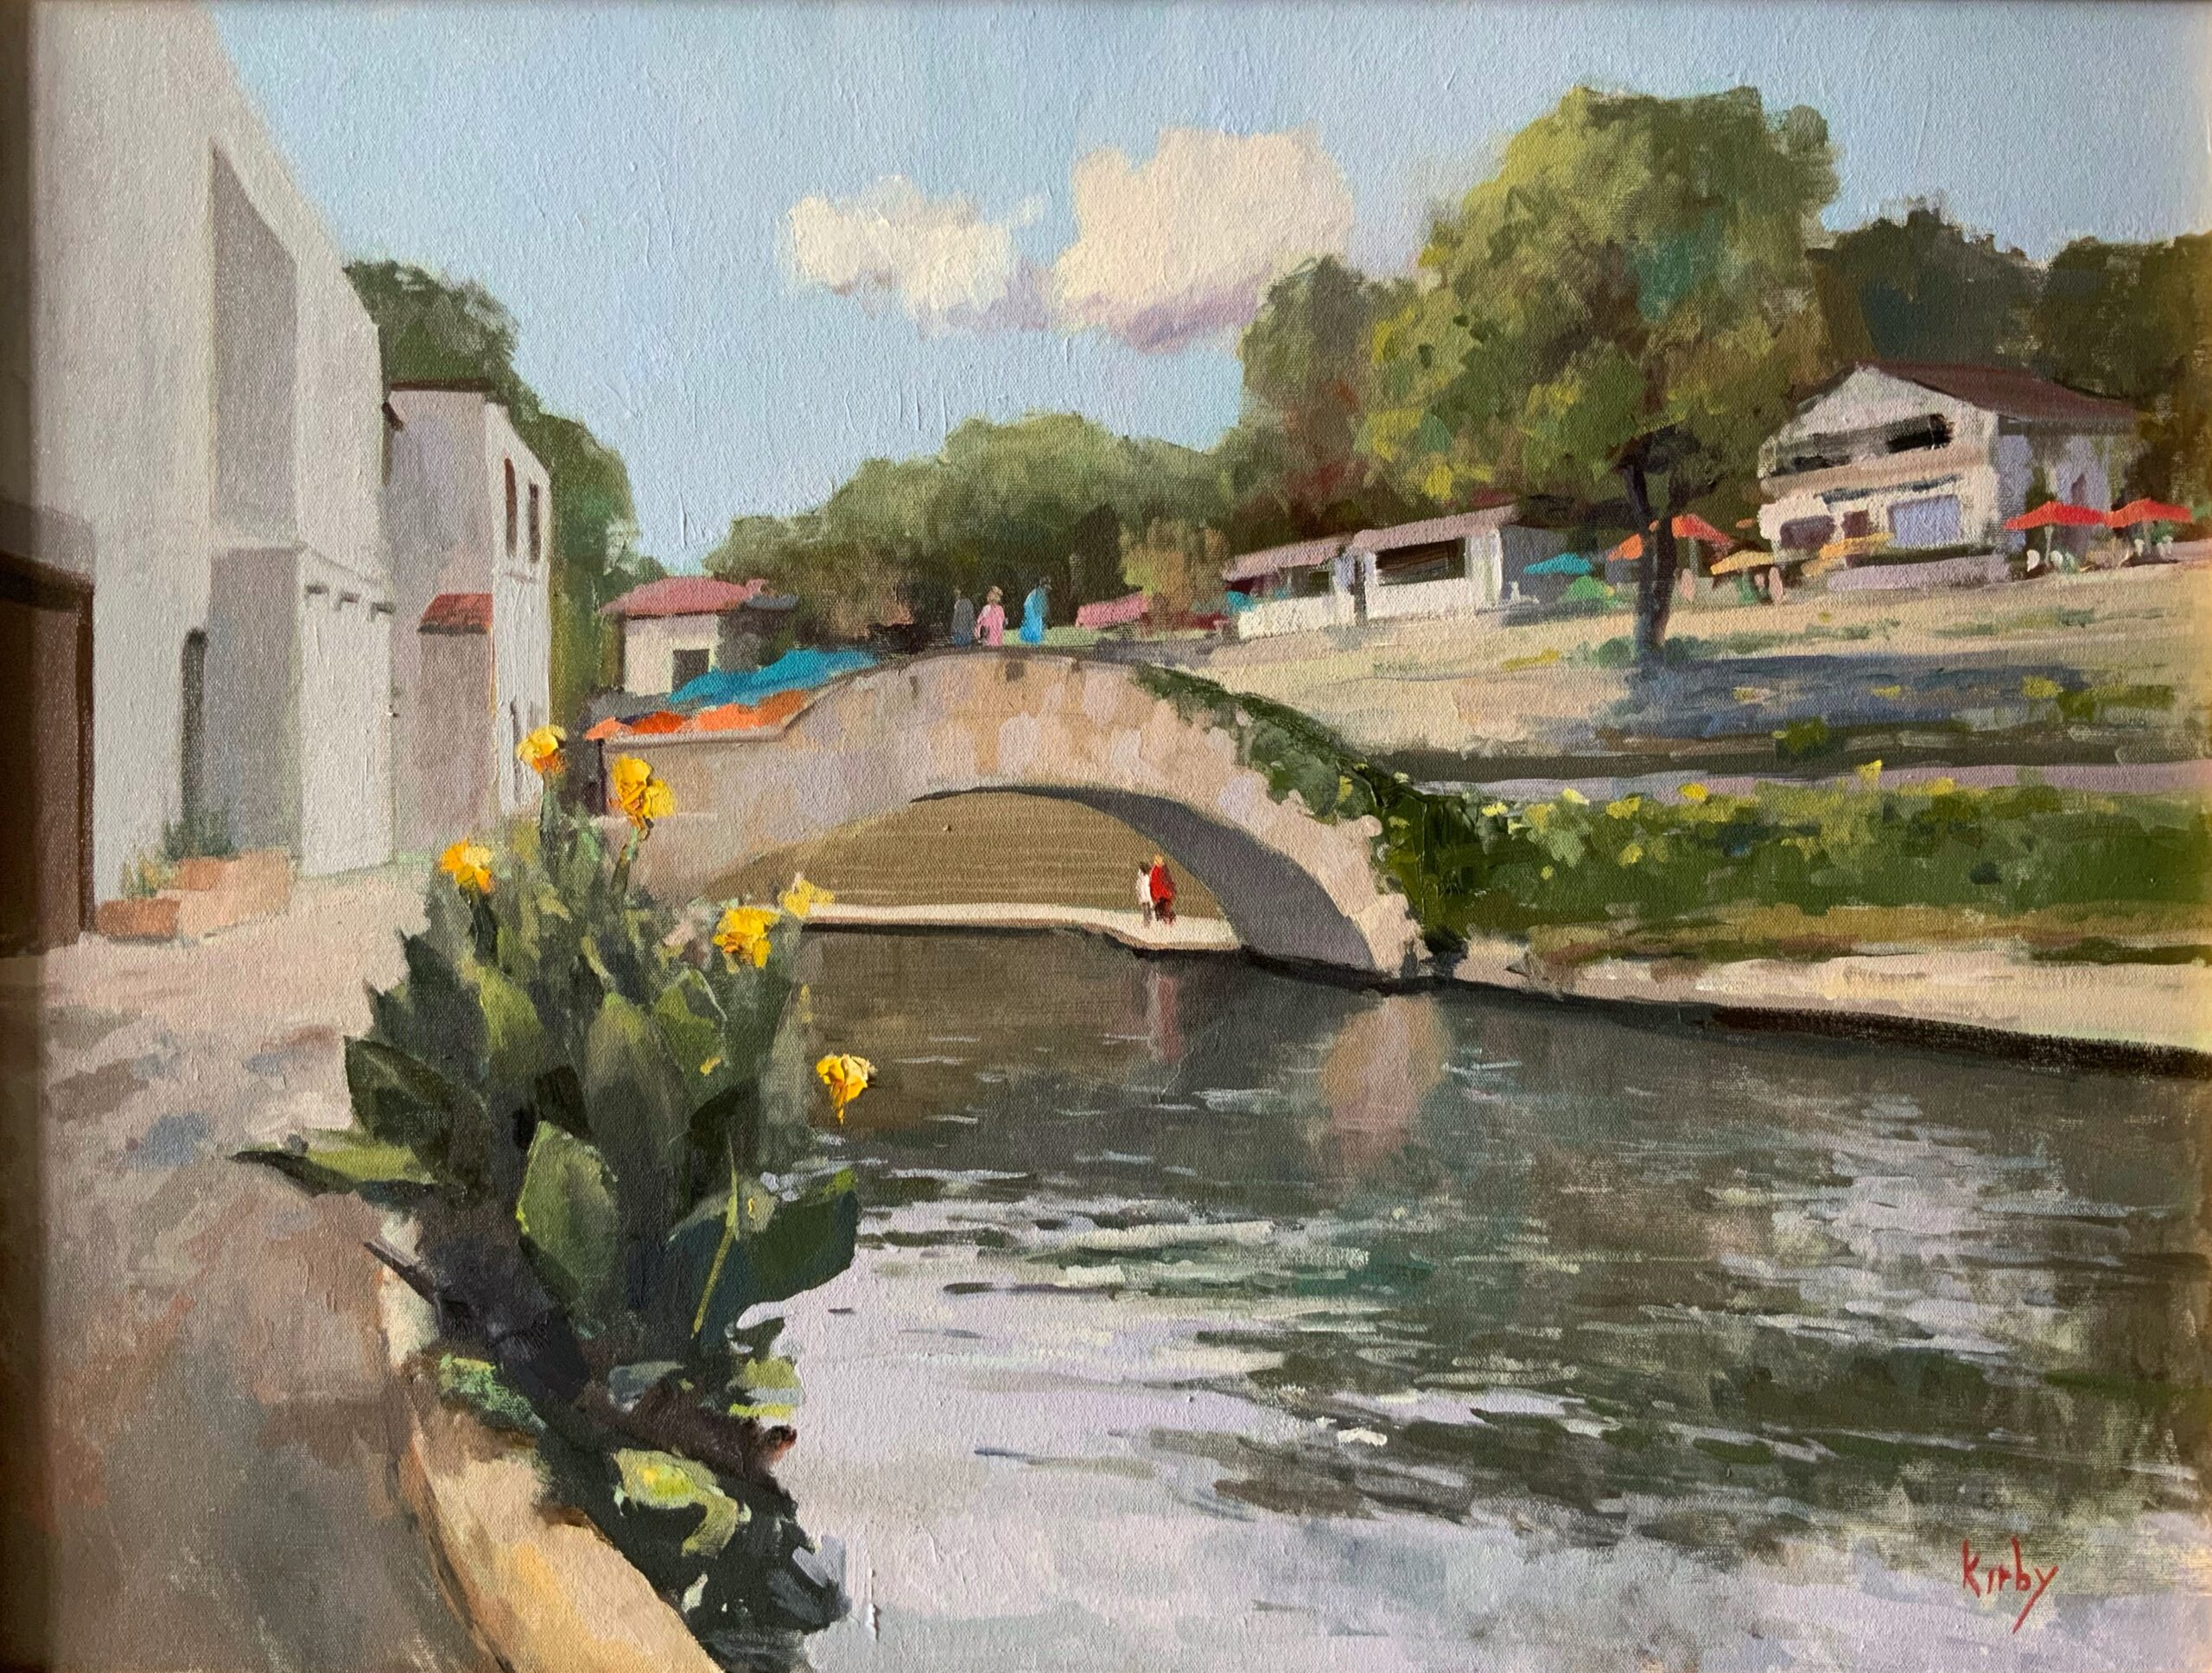 An oil painting, titled Touring the Rive Walk, by artist Randall Cogburn, illustrates a serene painting of the San Antonio River walk with tourists st anding at the crest of one of the many crossing bridges